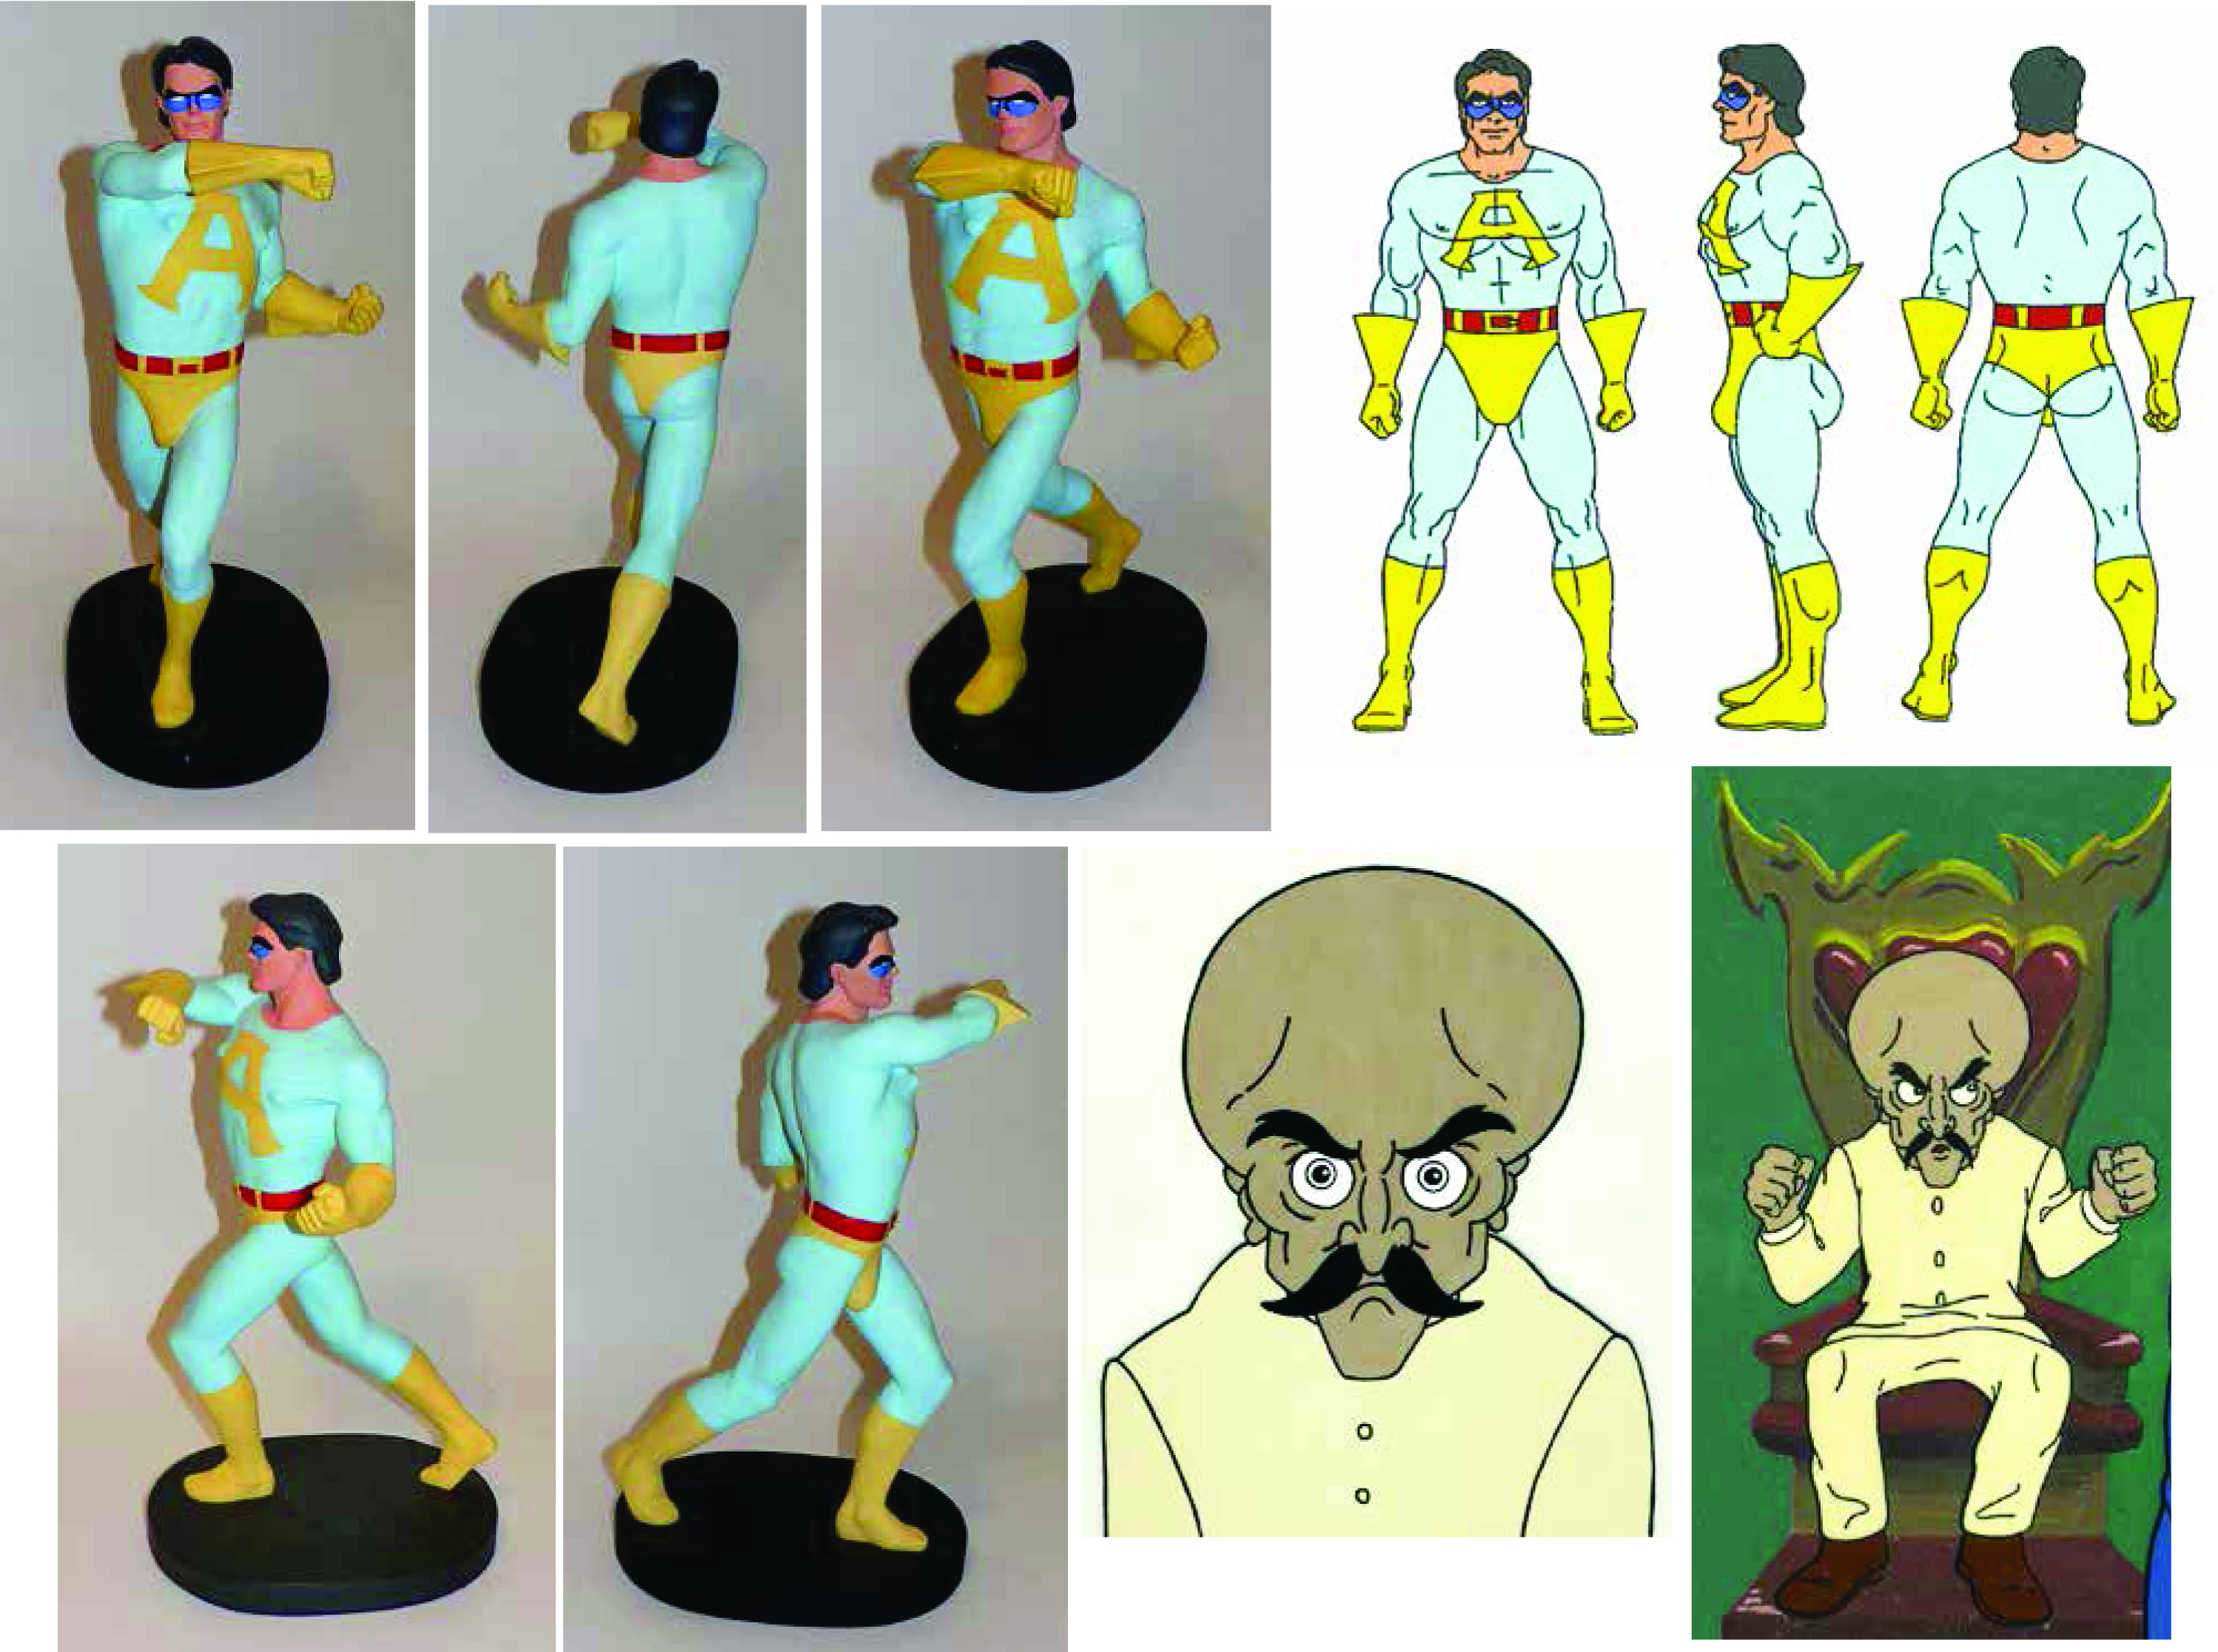 Actual 3D maquette Sedelmaier built of Ace as well as color reference for Bighead and Ace.